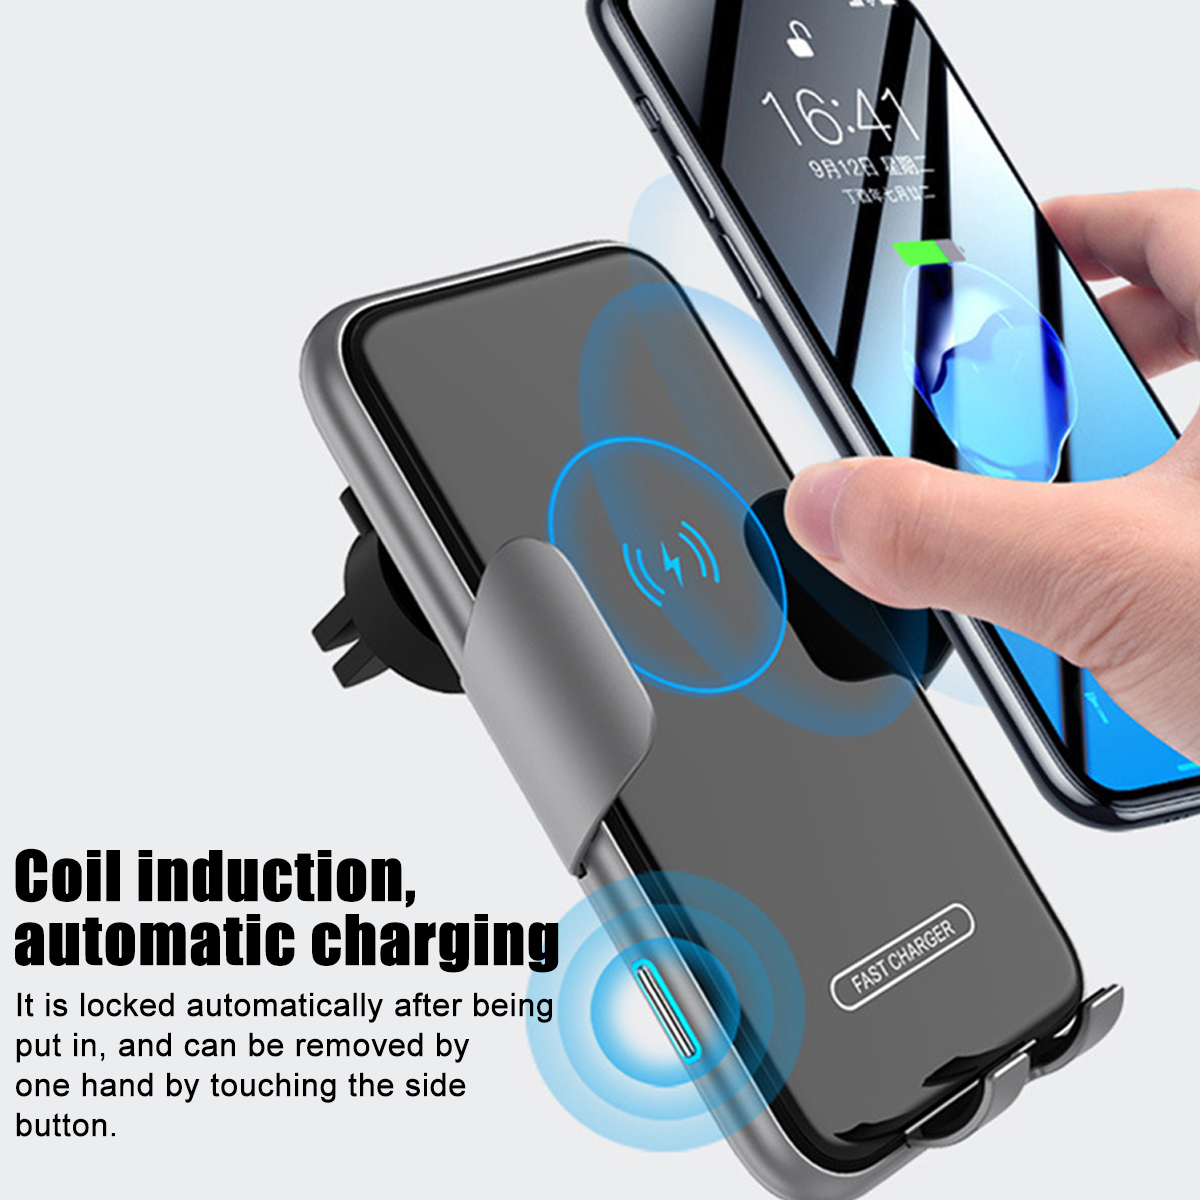 Bakeey-V8-15W-Wireless-Car-Charger-Intelligent-Sensing-Automatic-Clamping-Fast-Charging-For-iPhone-1-1750013-3